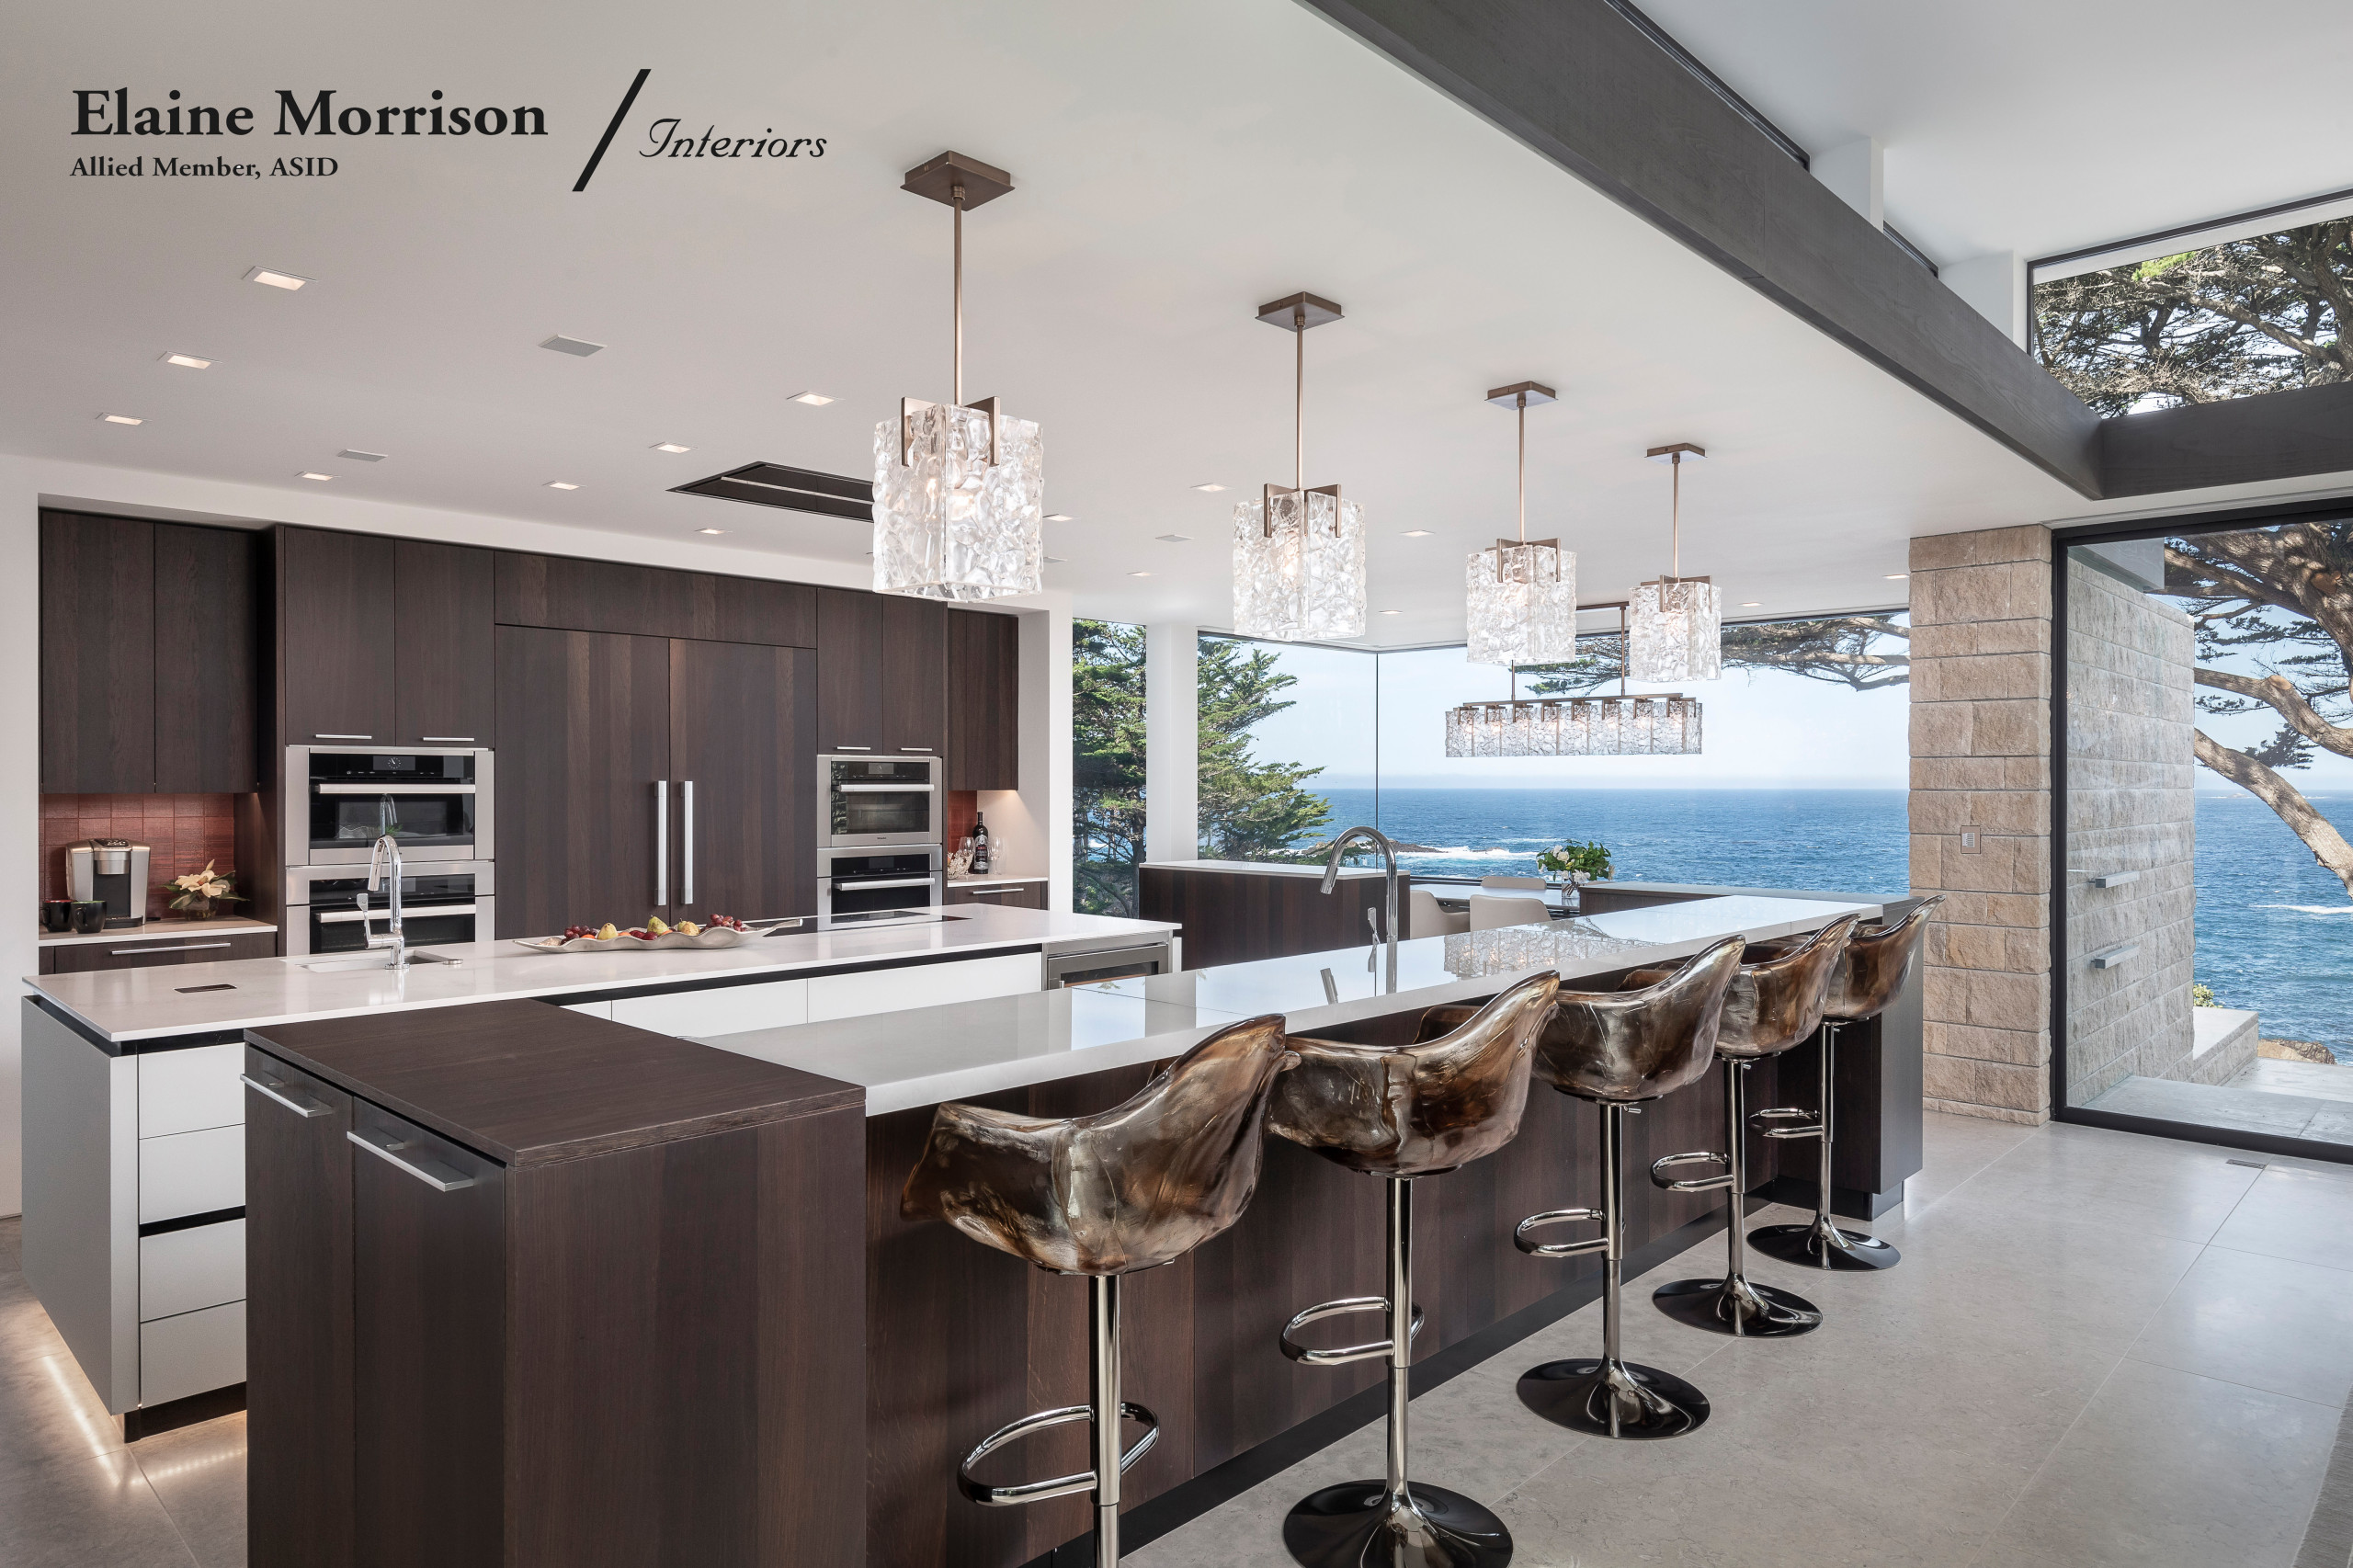 My Contemporary Kitchen Designed for a Majestic New Home in Carmel Highlands, Ca